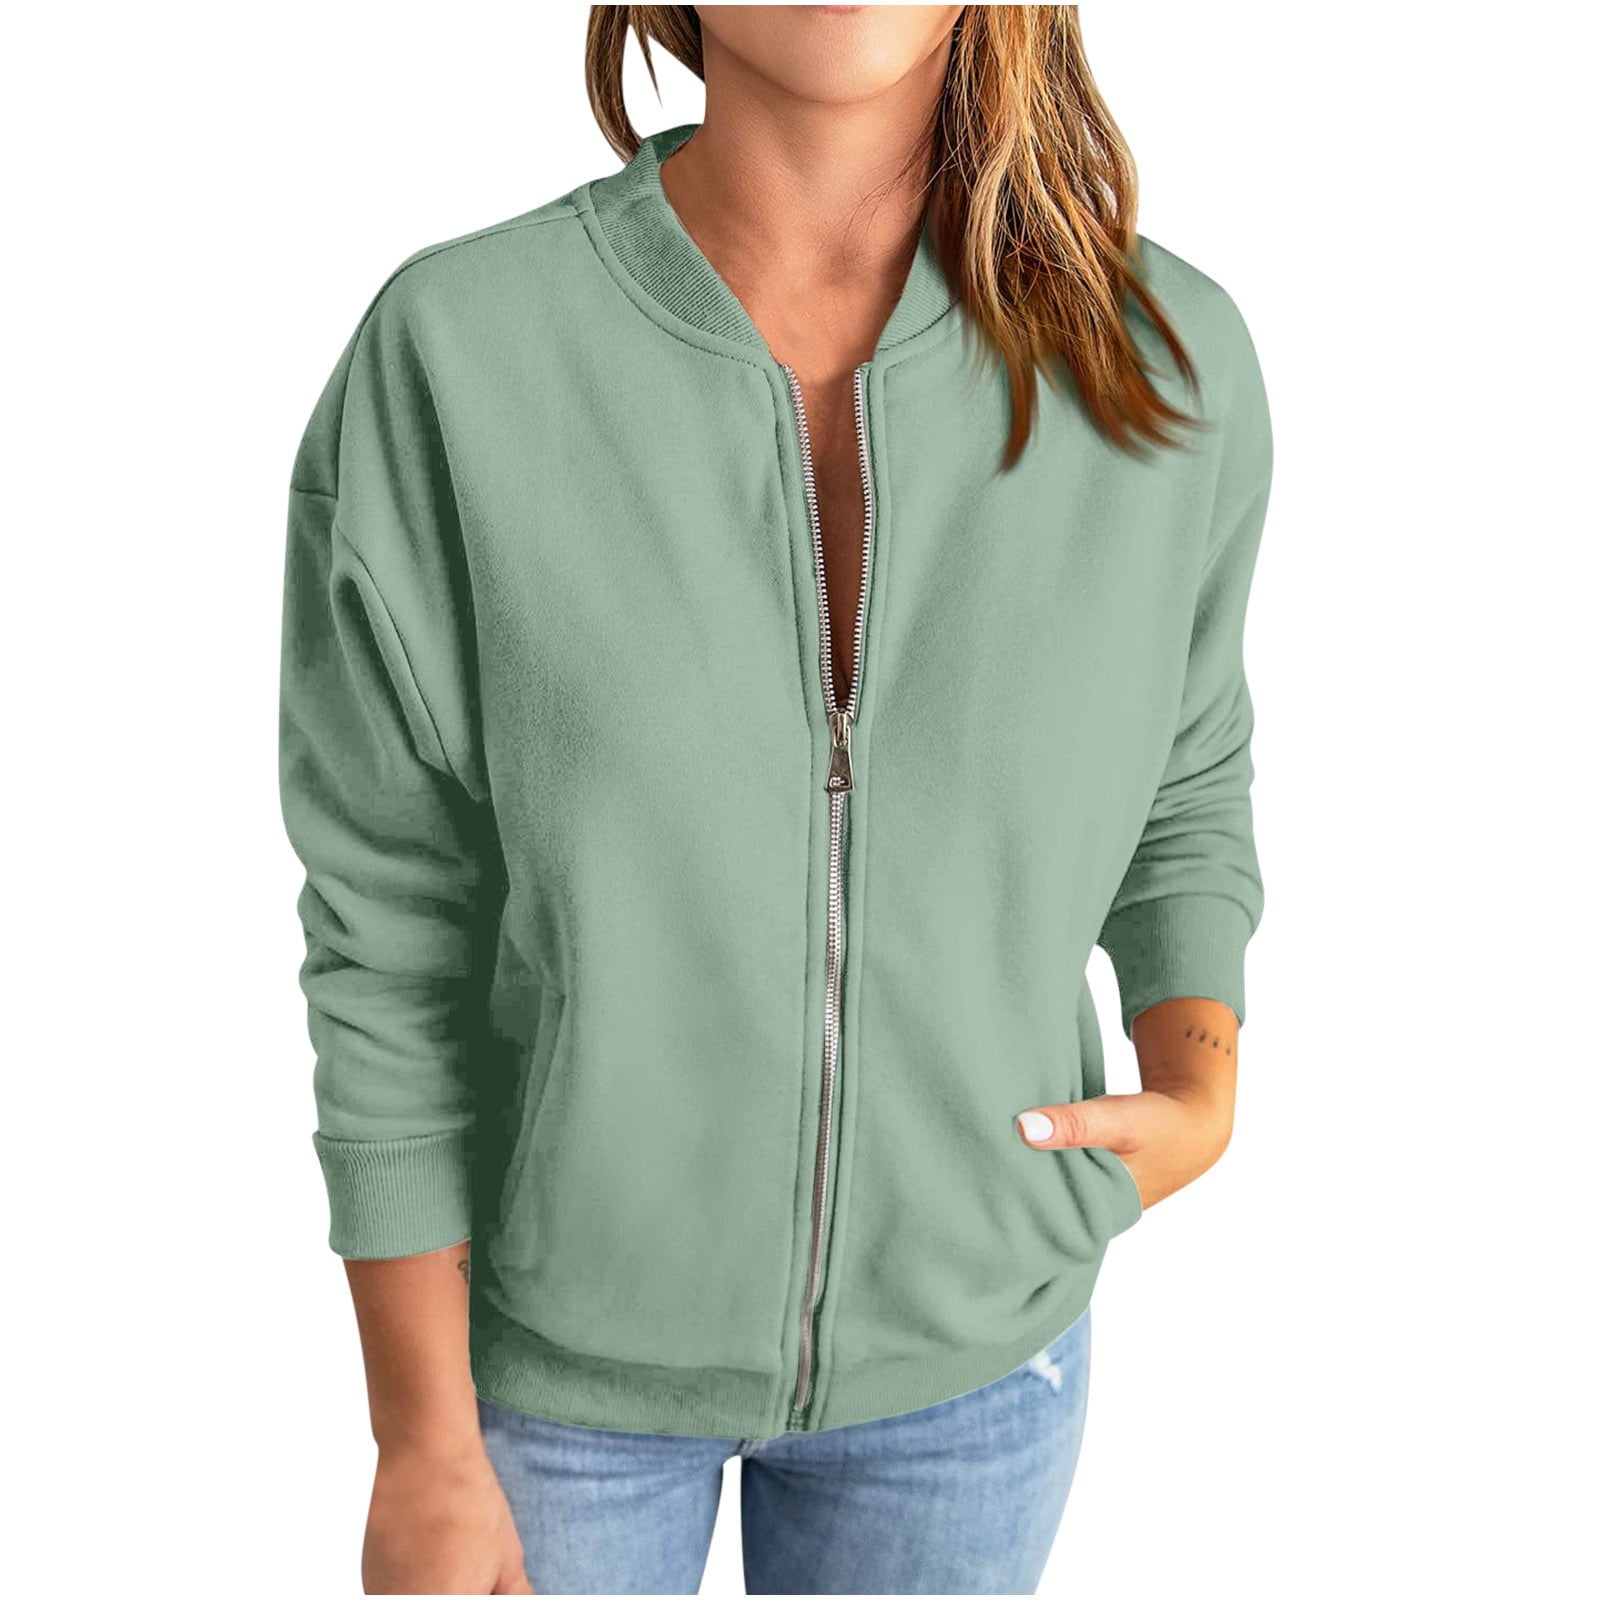  Pejock Casual Full Zip Up Hoodies for Women Comfy Loose Long  Sleeve Lightweight Sweatshirt Solid Color Jacket with Pockets Beige :  Sports & Outdoors